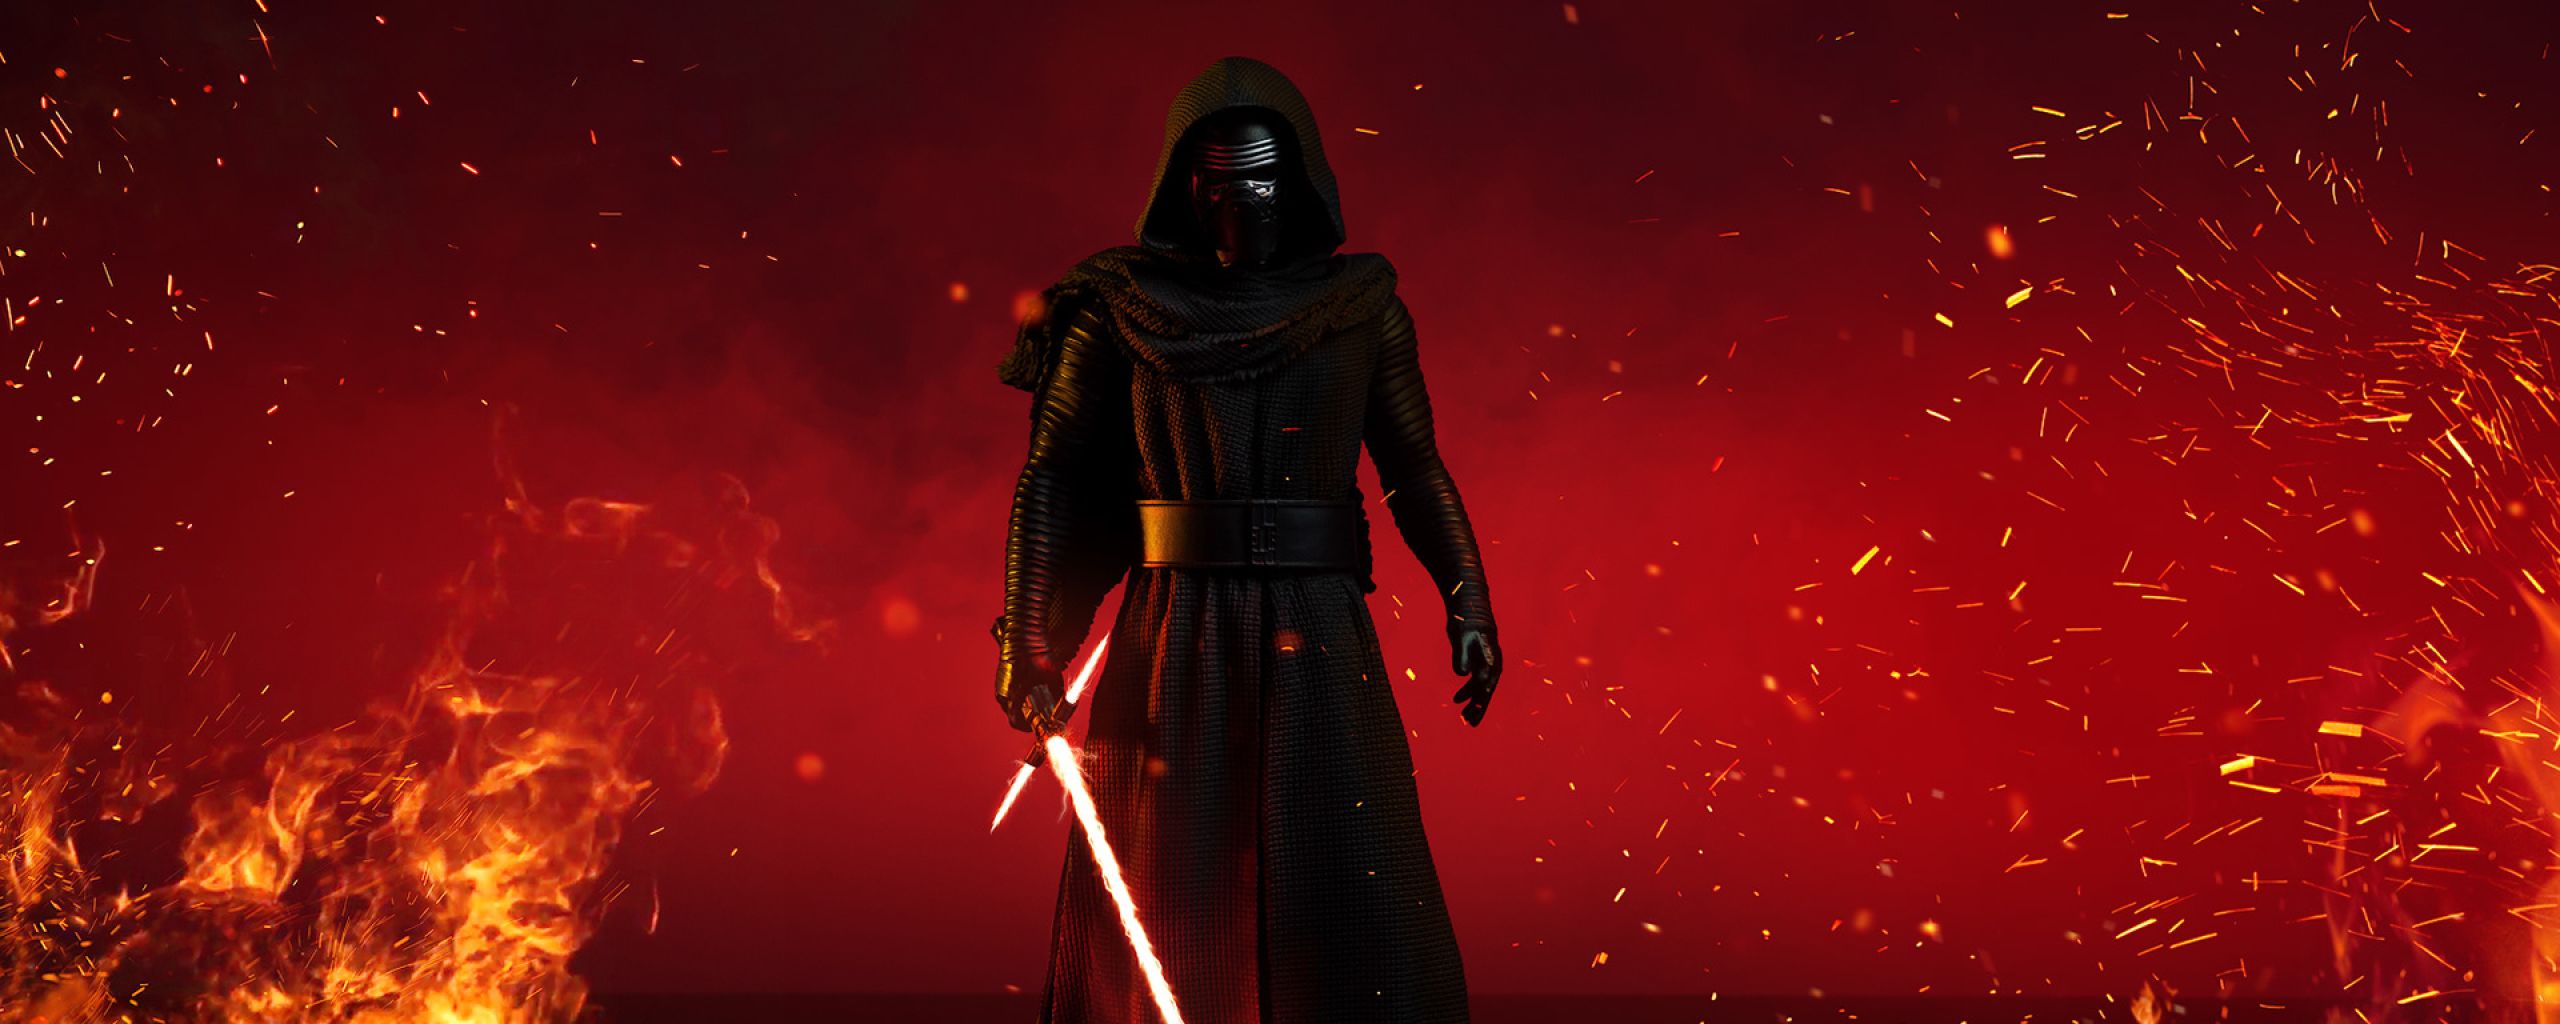 Kylo Ren With Lightsaber In Star Wars 2560x1024 Resolution Wallpaper, HD Movies 4K Wallpaper, Image, Photo and Background